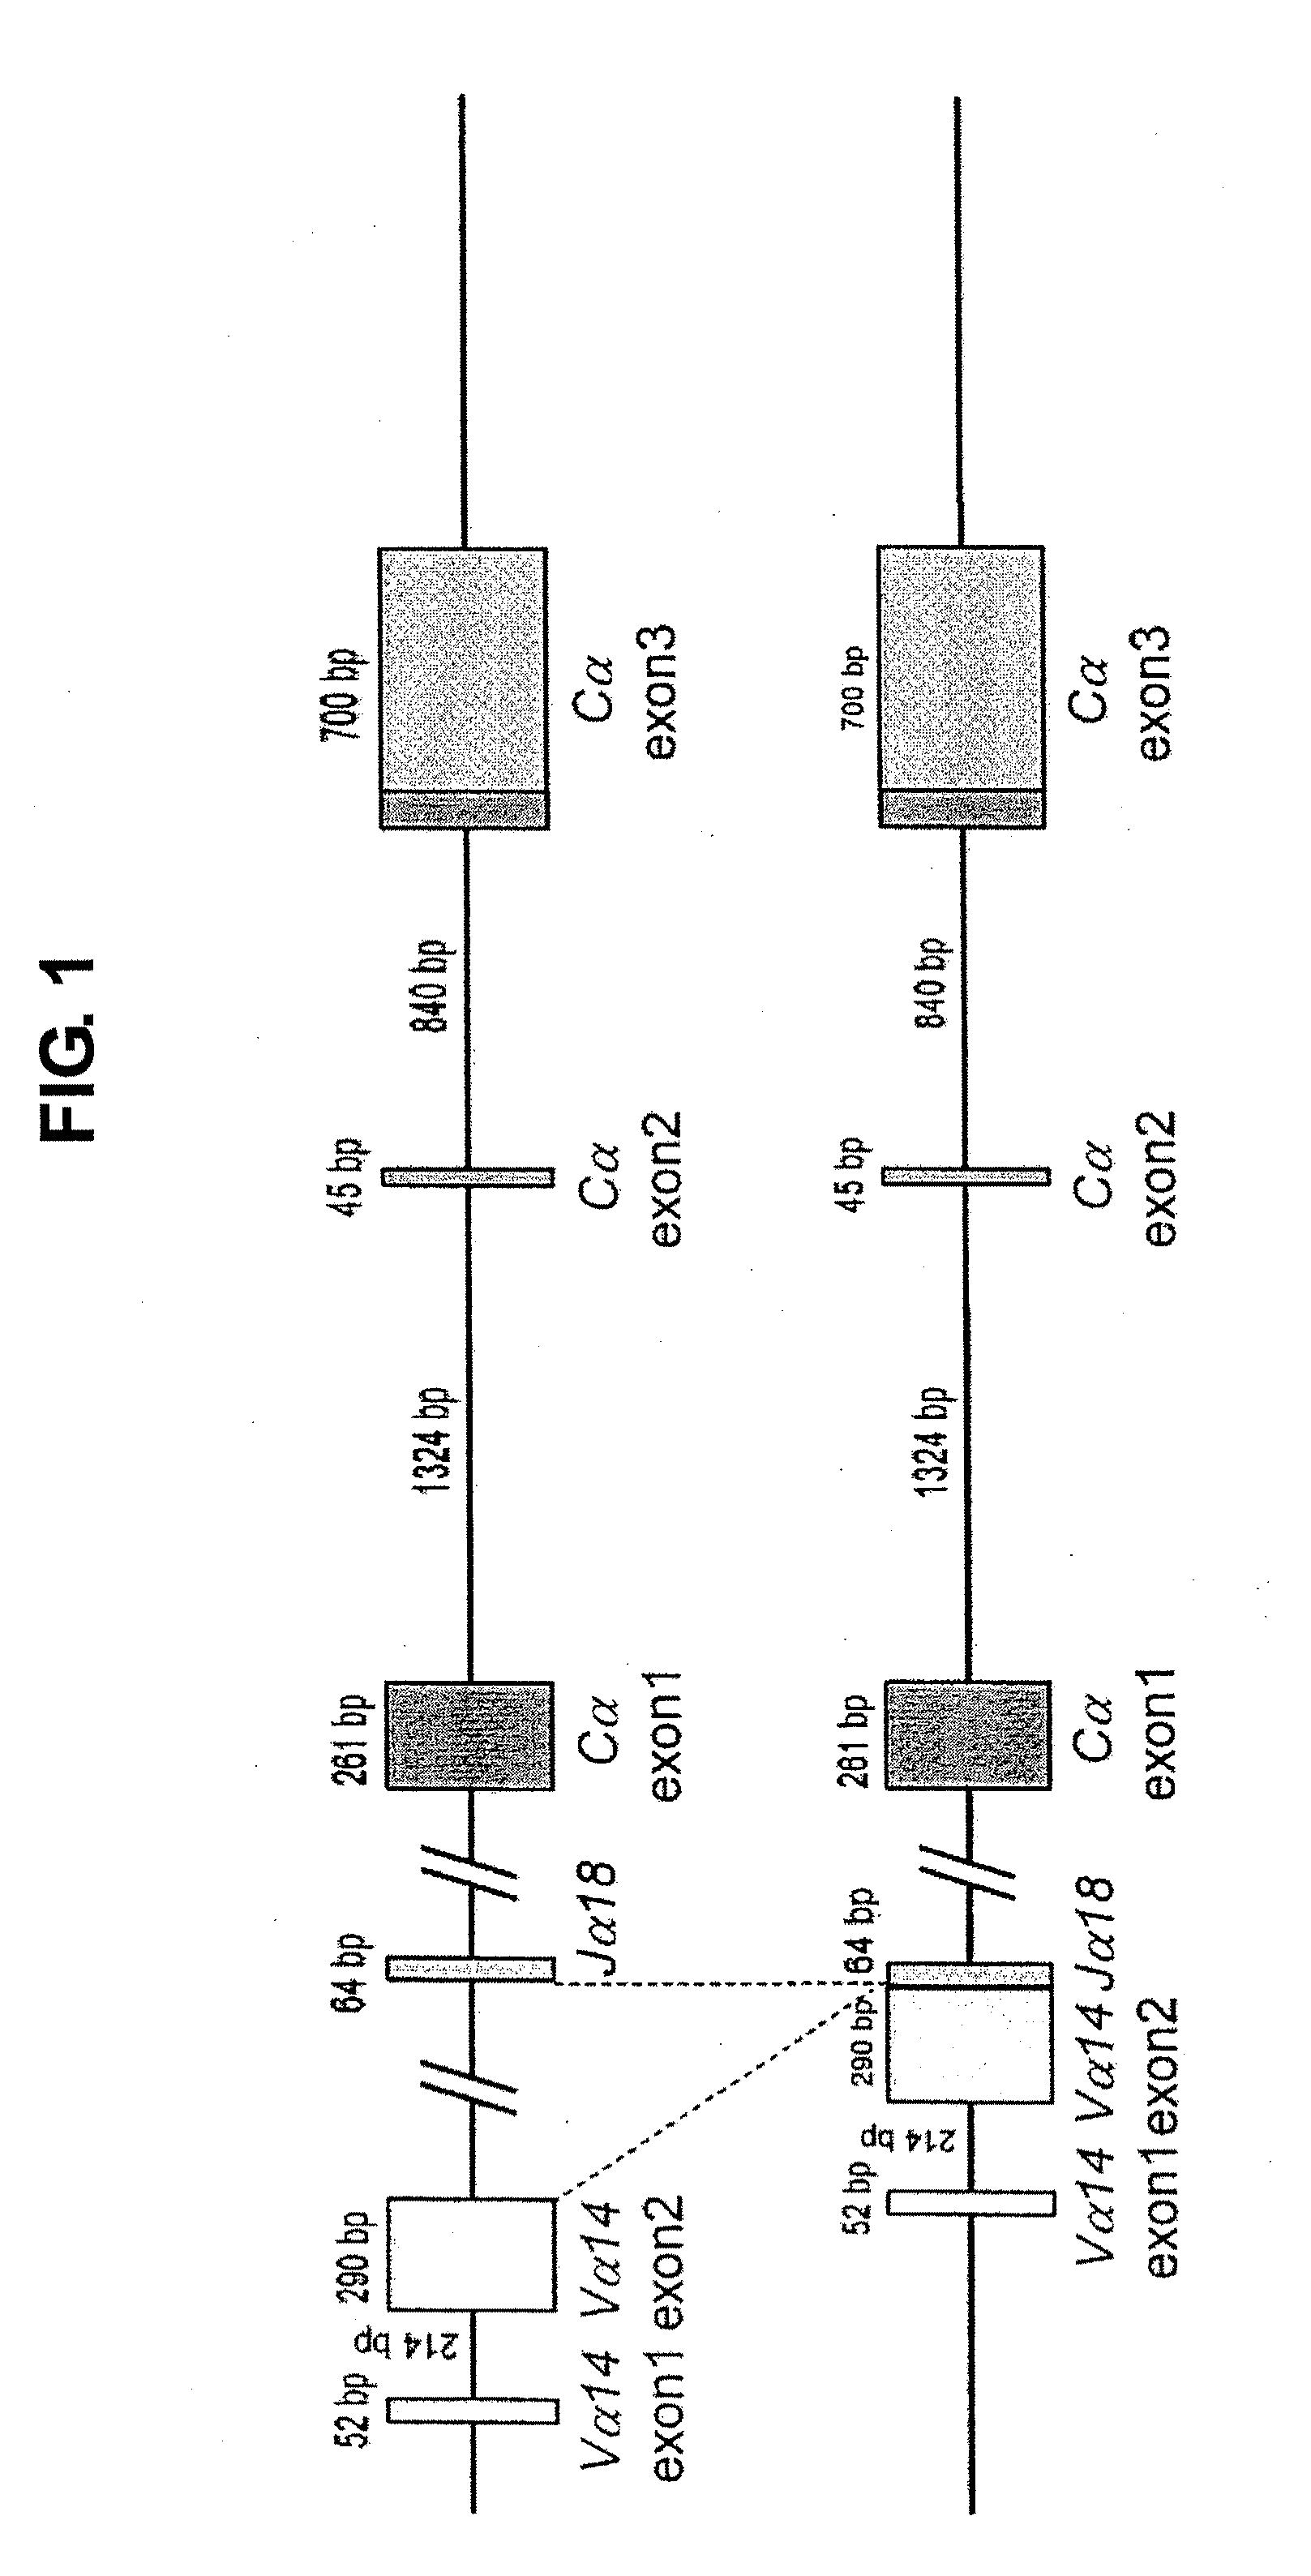 NKT CELL-DERIVED iPS CELLS AND NKT CELLS DERIVED THEREFROM